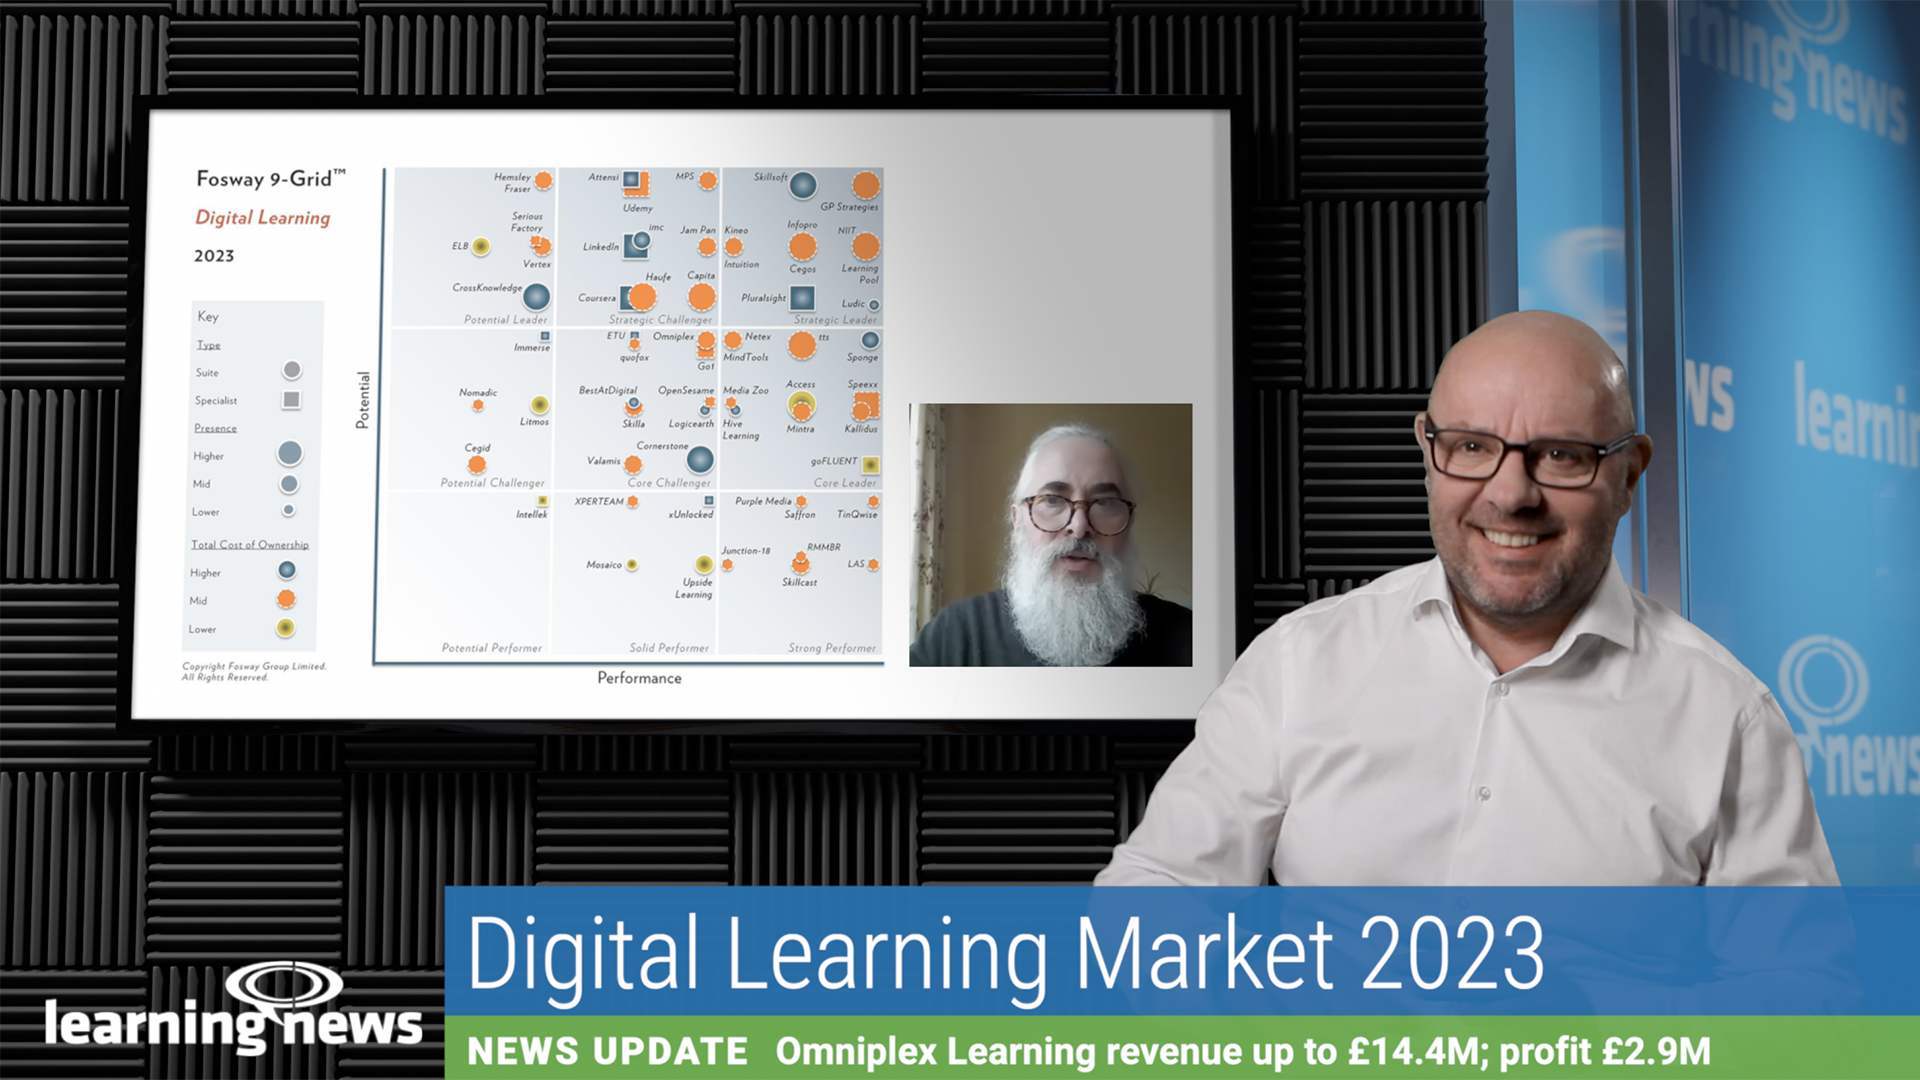 Digital Learning Market 2023: David Perring from Fosway joins Rob Clarke on Learning News to discuss the 2023 9-Grid™ for Digital Learning